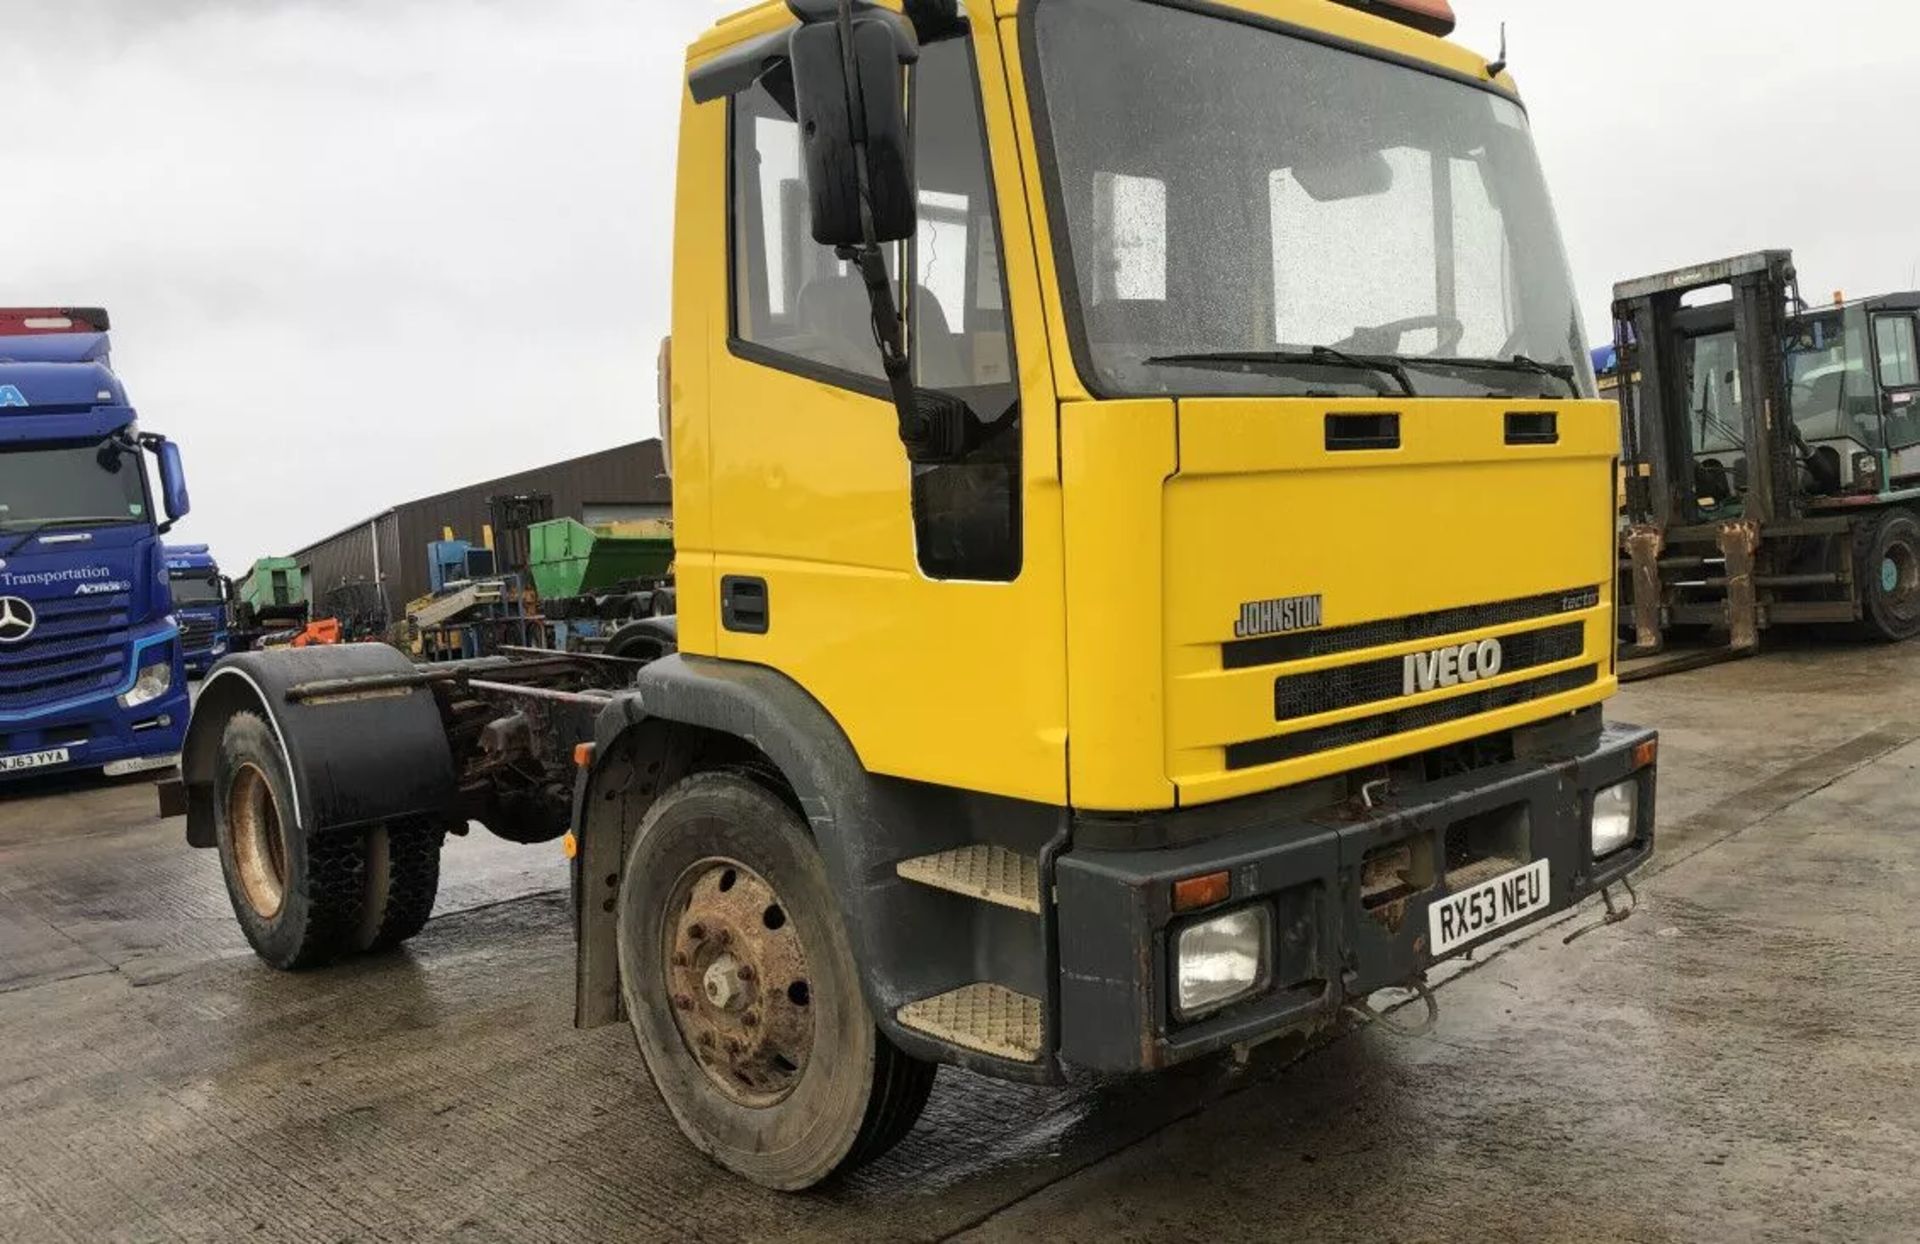 IVECO 130E18 LHD CAB AND CHASSIS